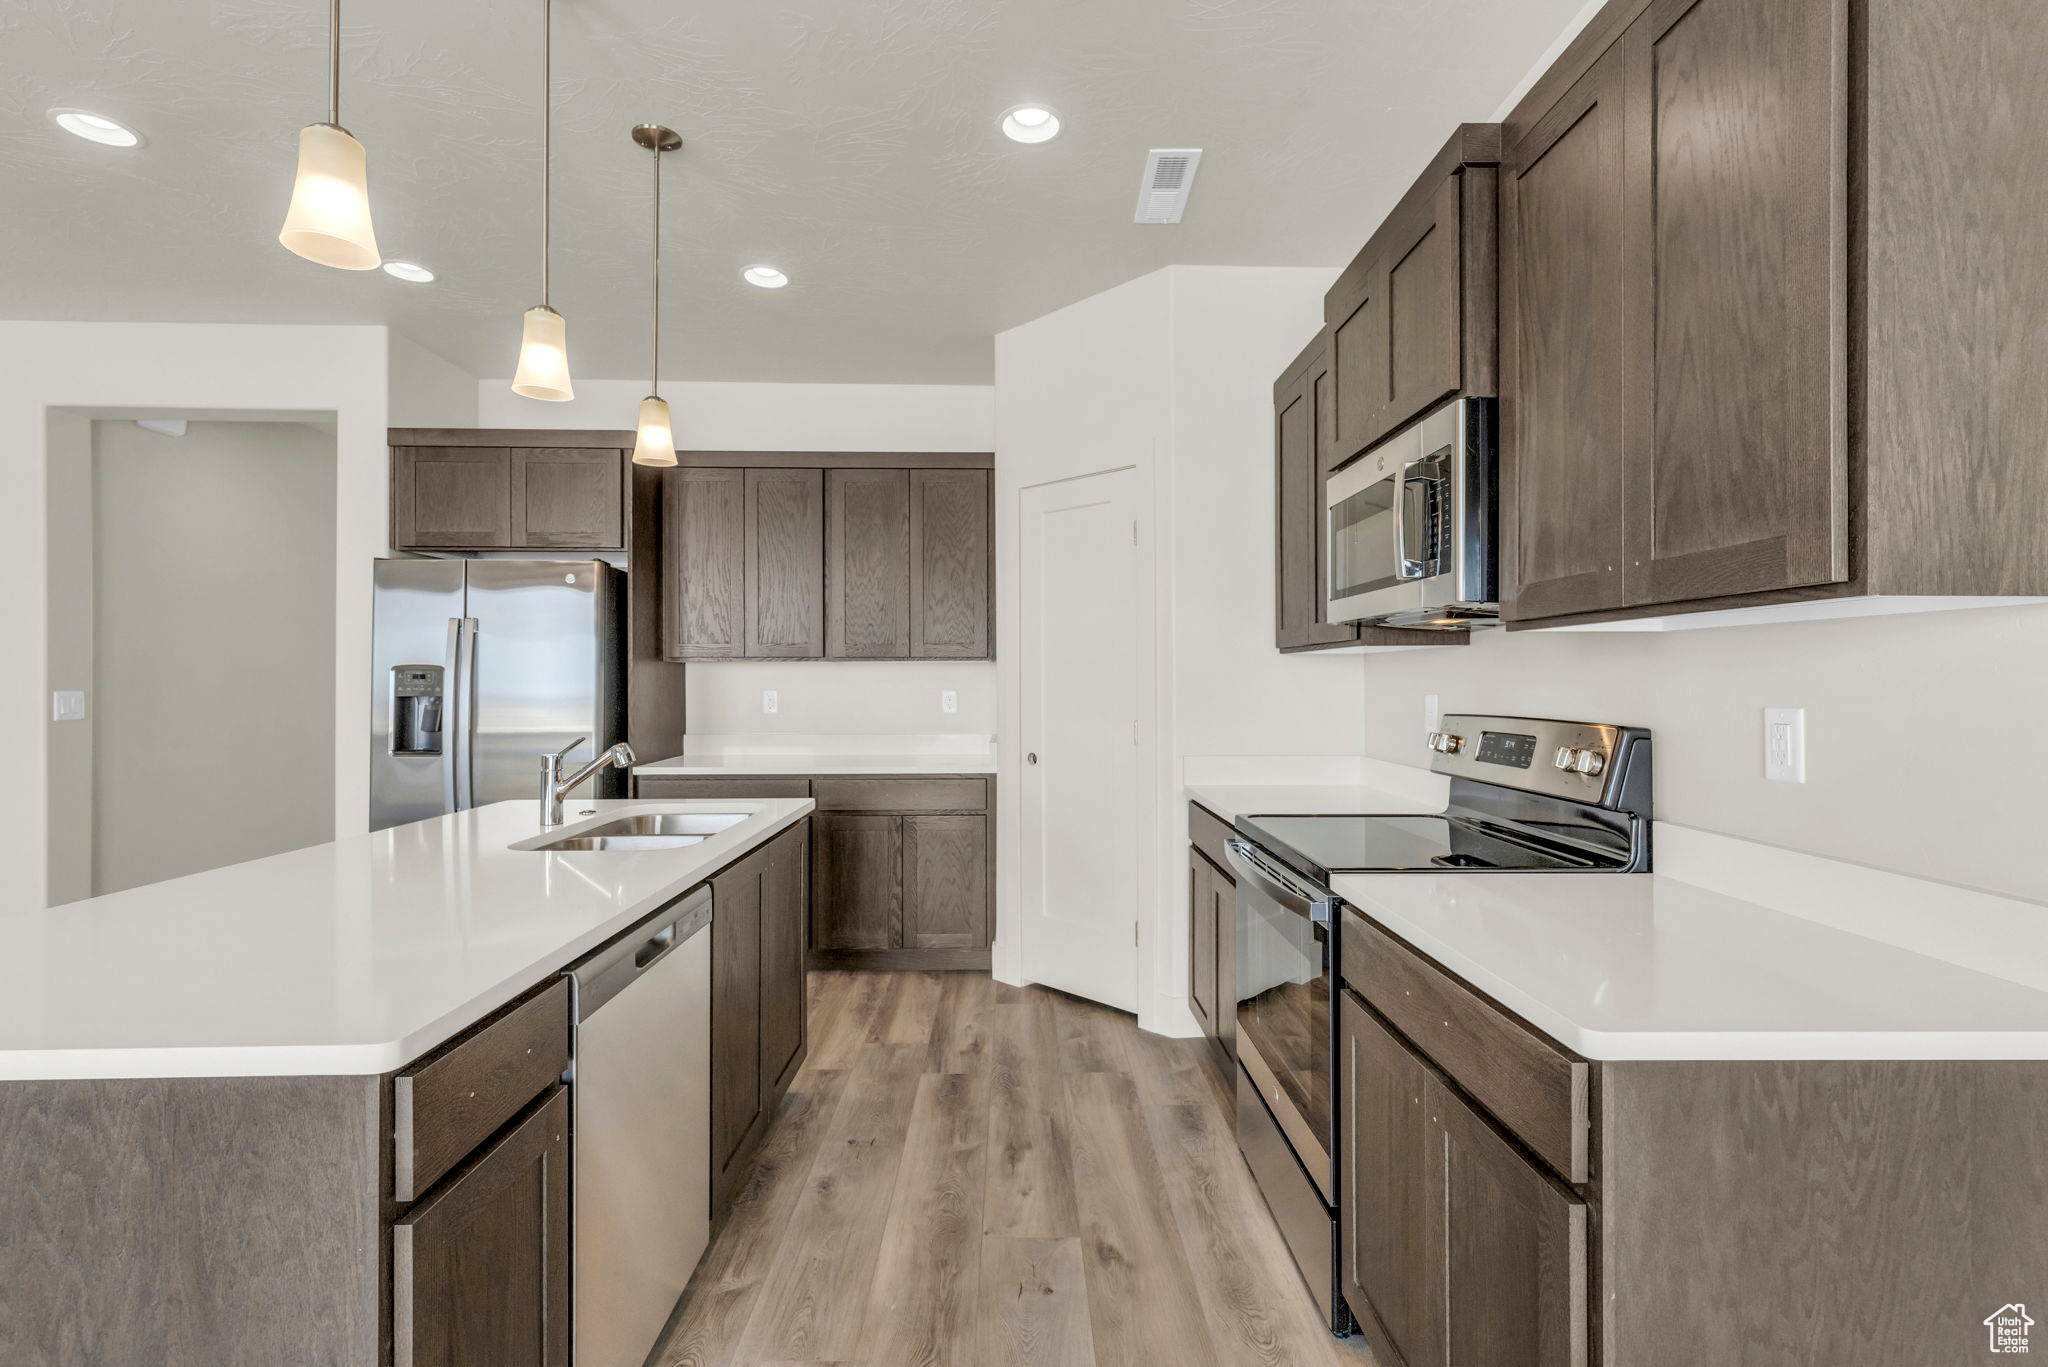 Kitchen featuring light hardwood / wood-style floors, a kitchen island with sink, hanging light fixtures, stainless steel appliances, and dark brown cabinetry